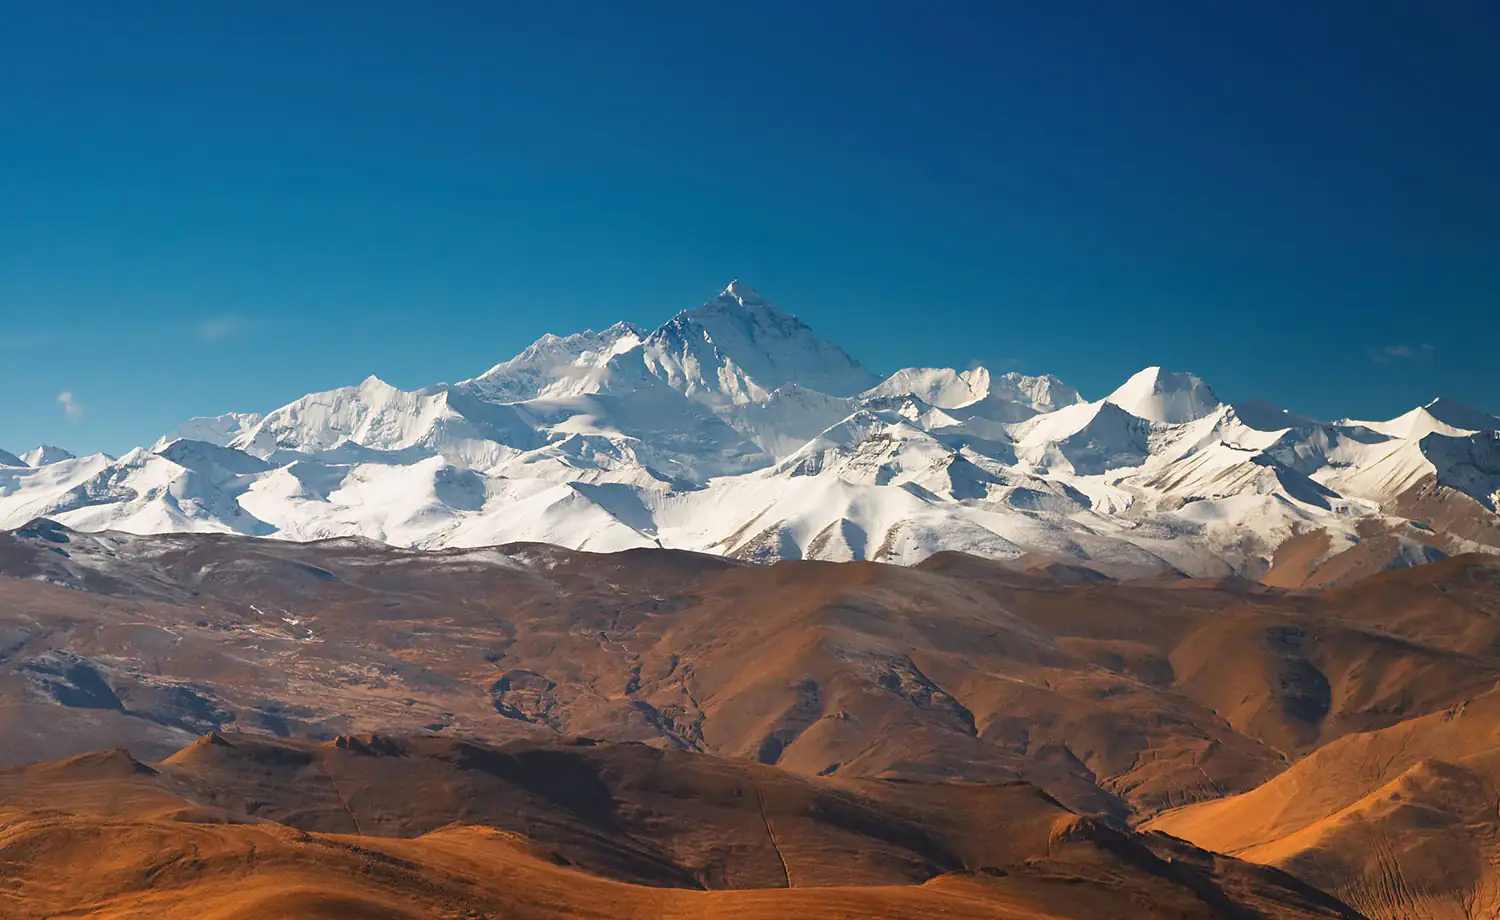 View of the Himalaya mountains